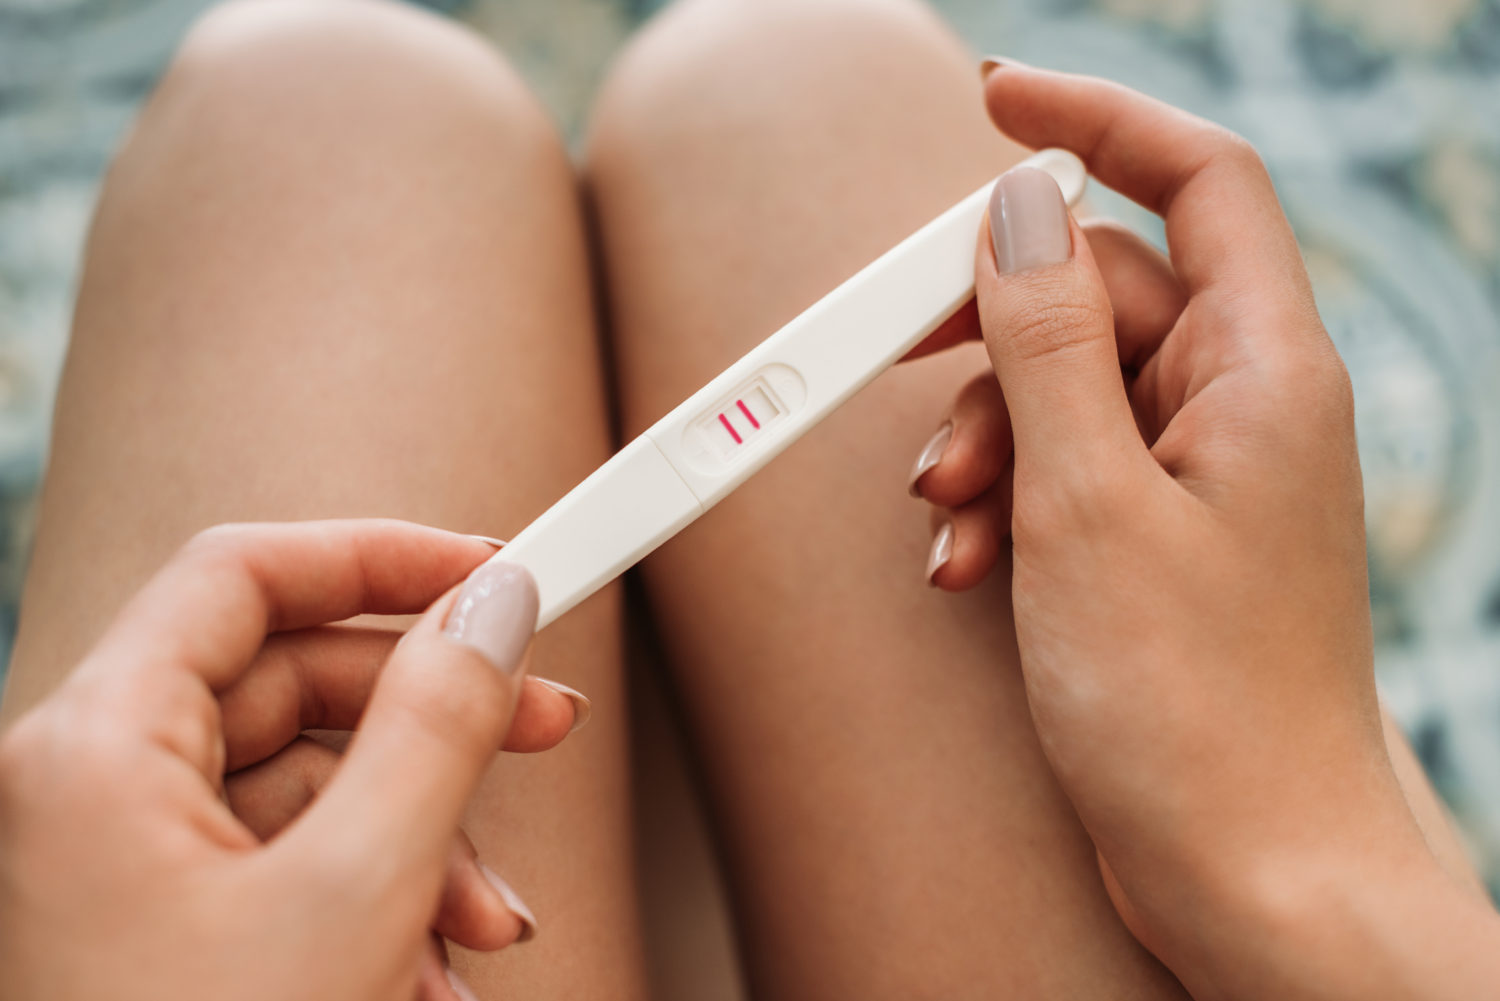 15 Things to Do When you Find Out You’re Pregnant